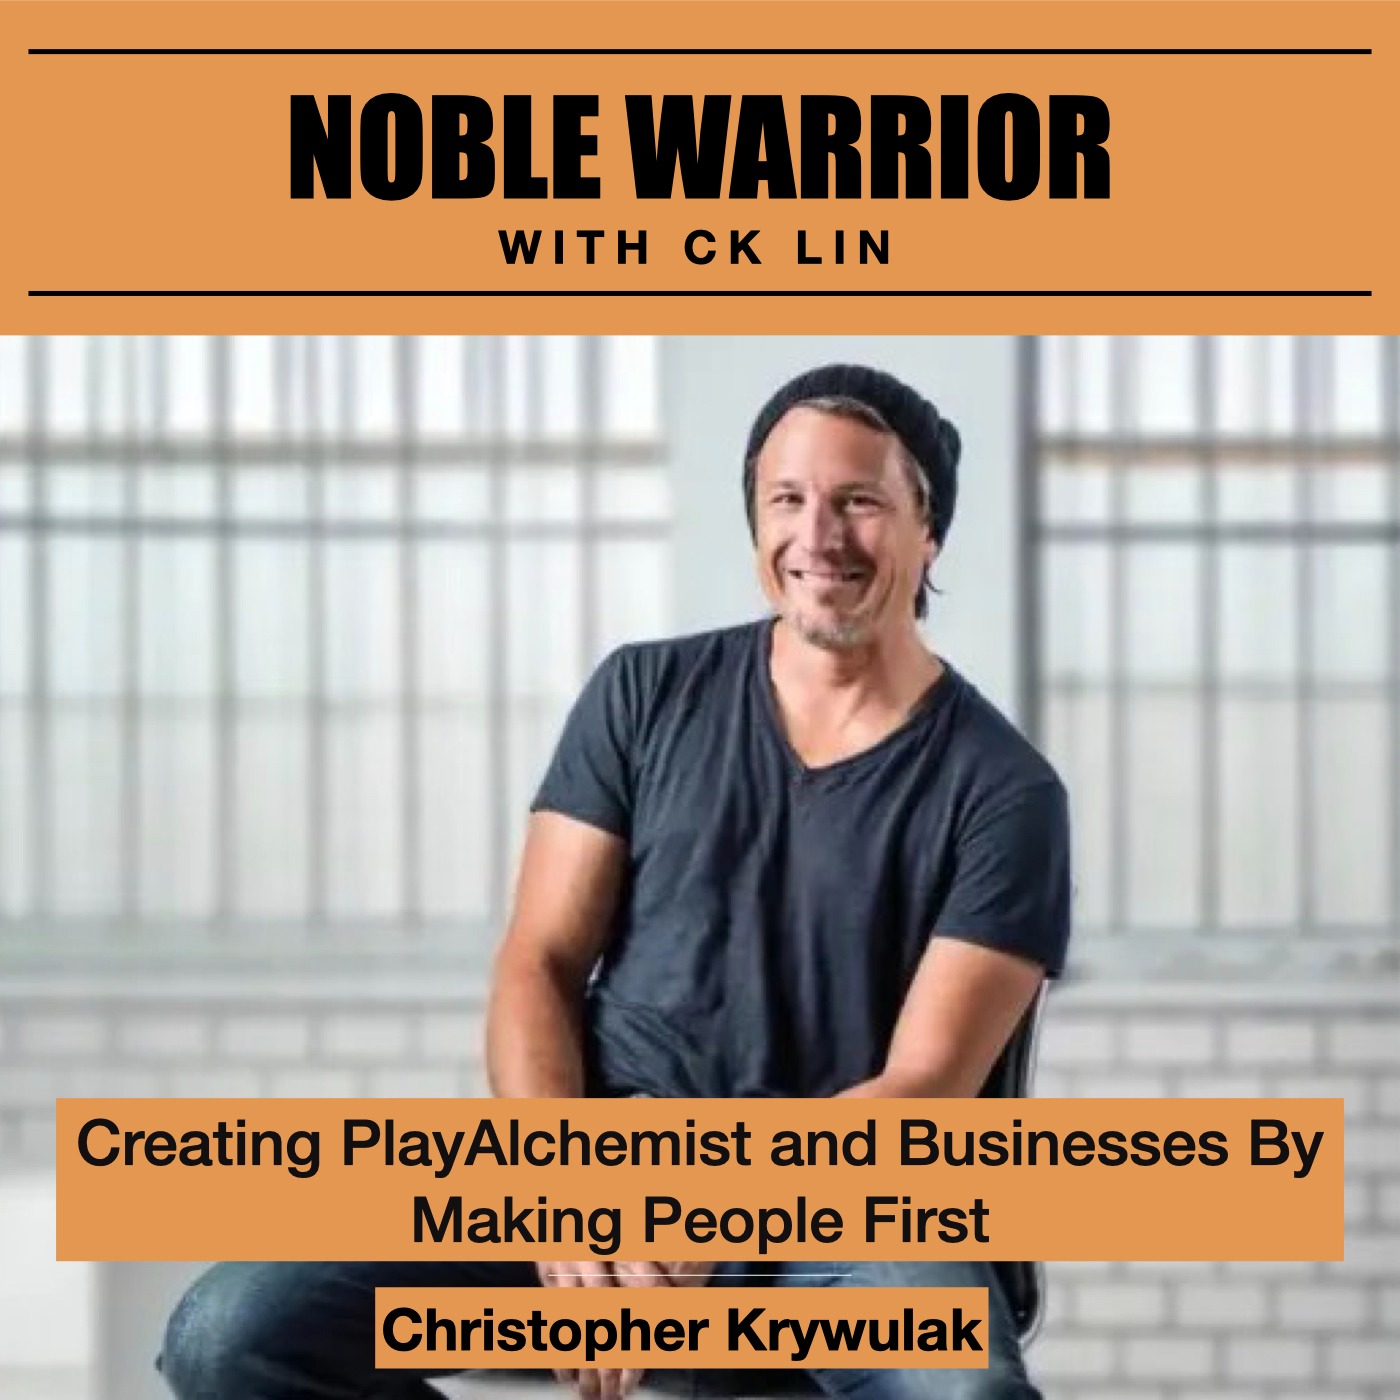 154 Christopher Krywulak: Creating Playalchemist and Businesses By Making People First Image